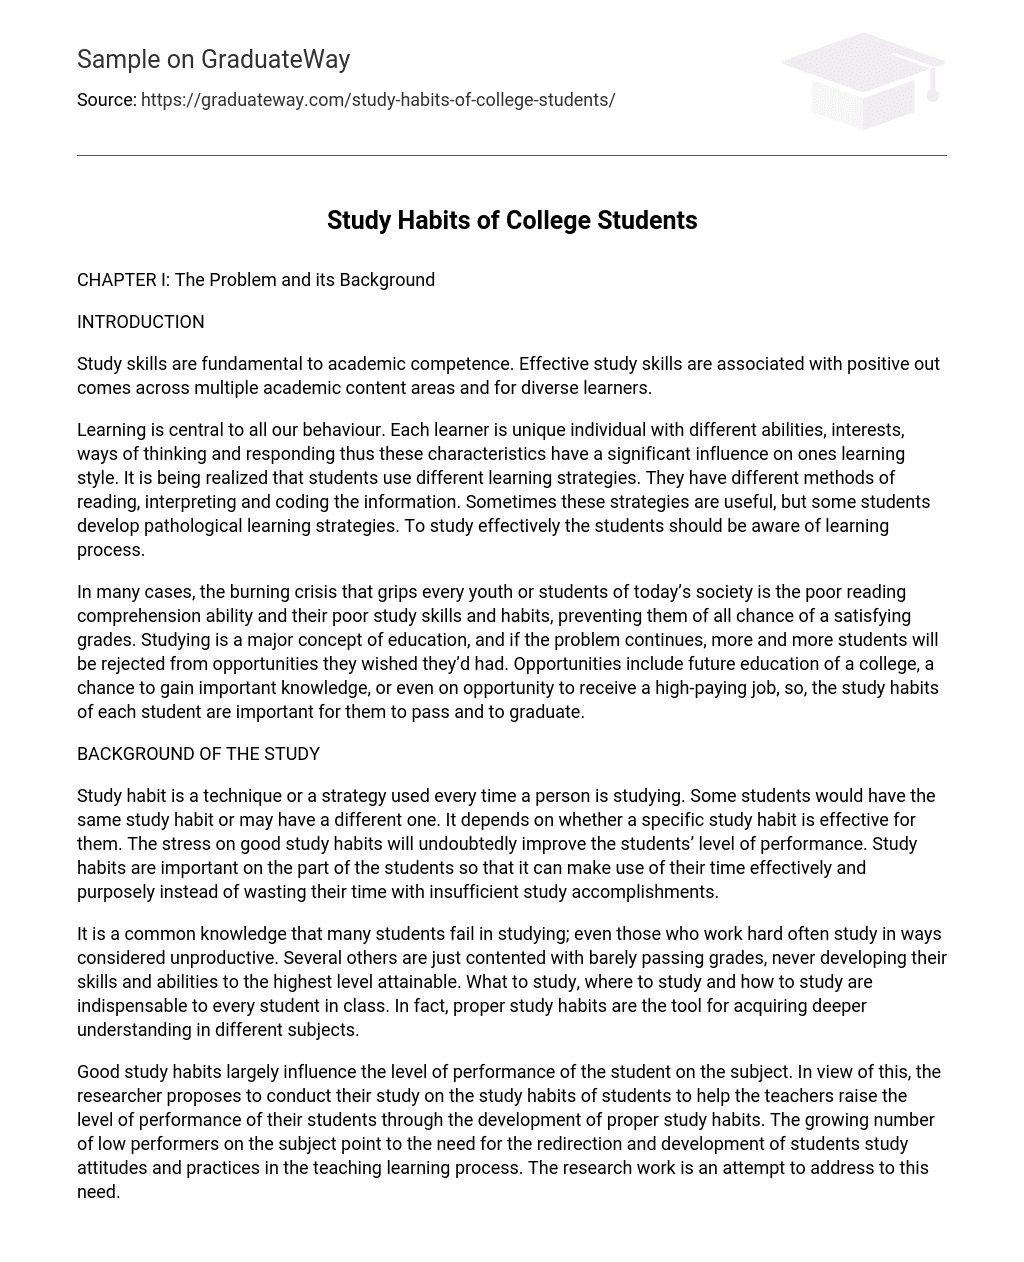 classification essay about study habits